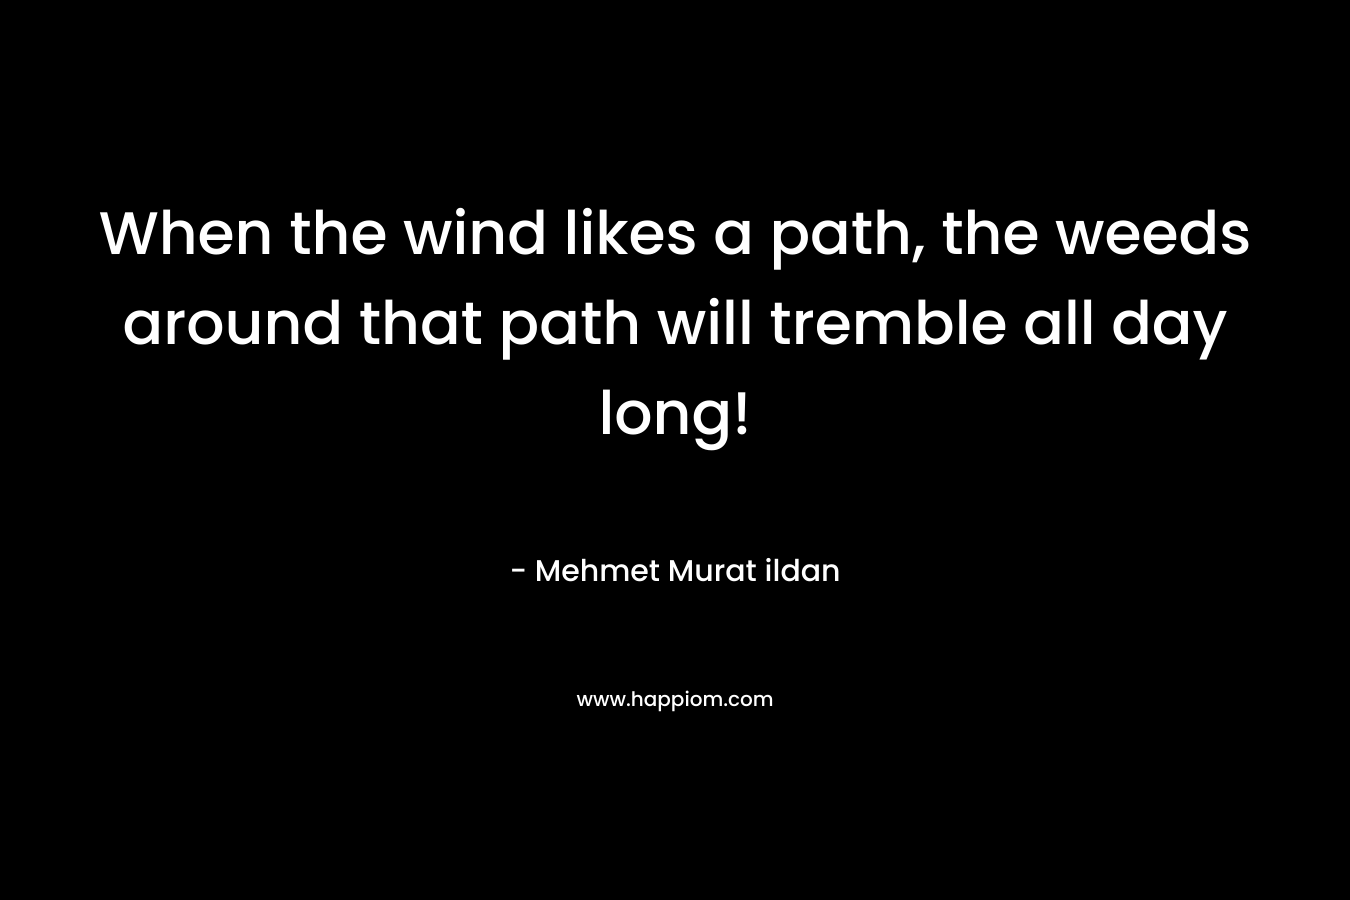 When the wind likes a path, the weeds around that path will tremble all day long!